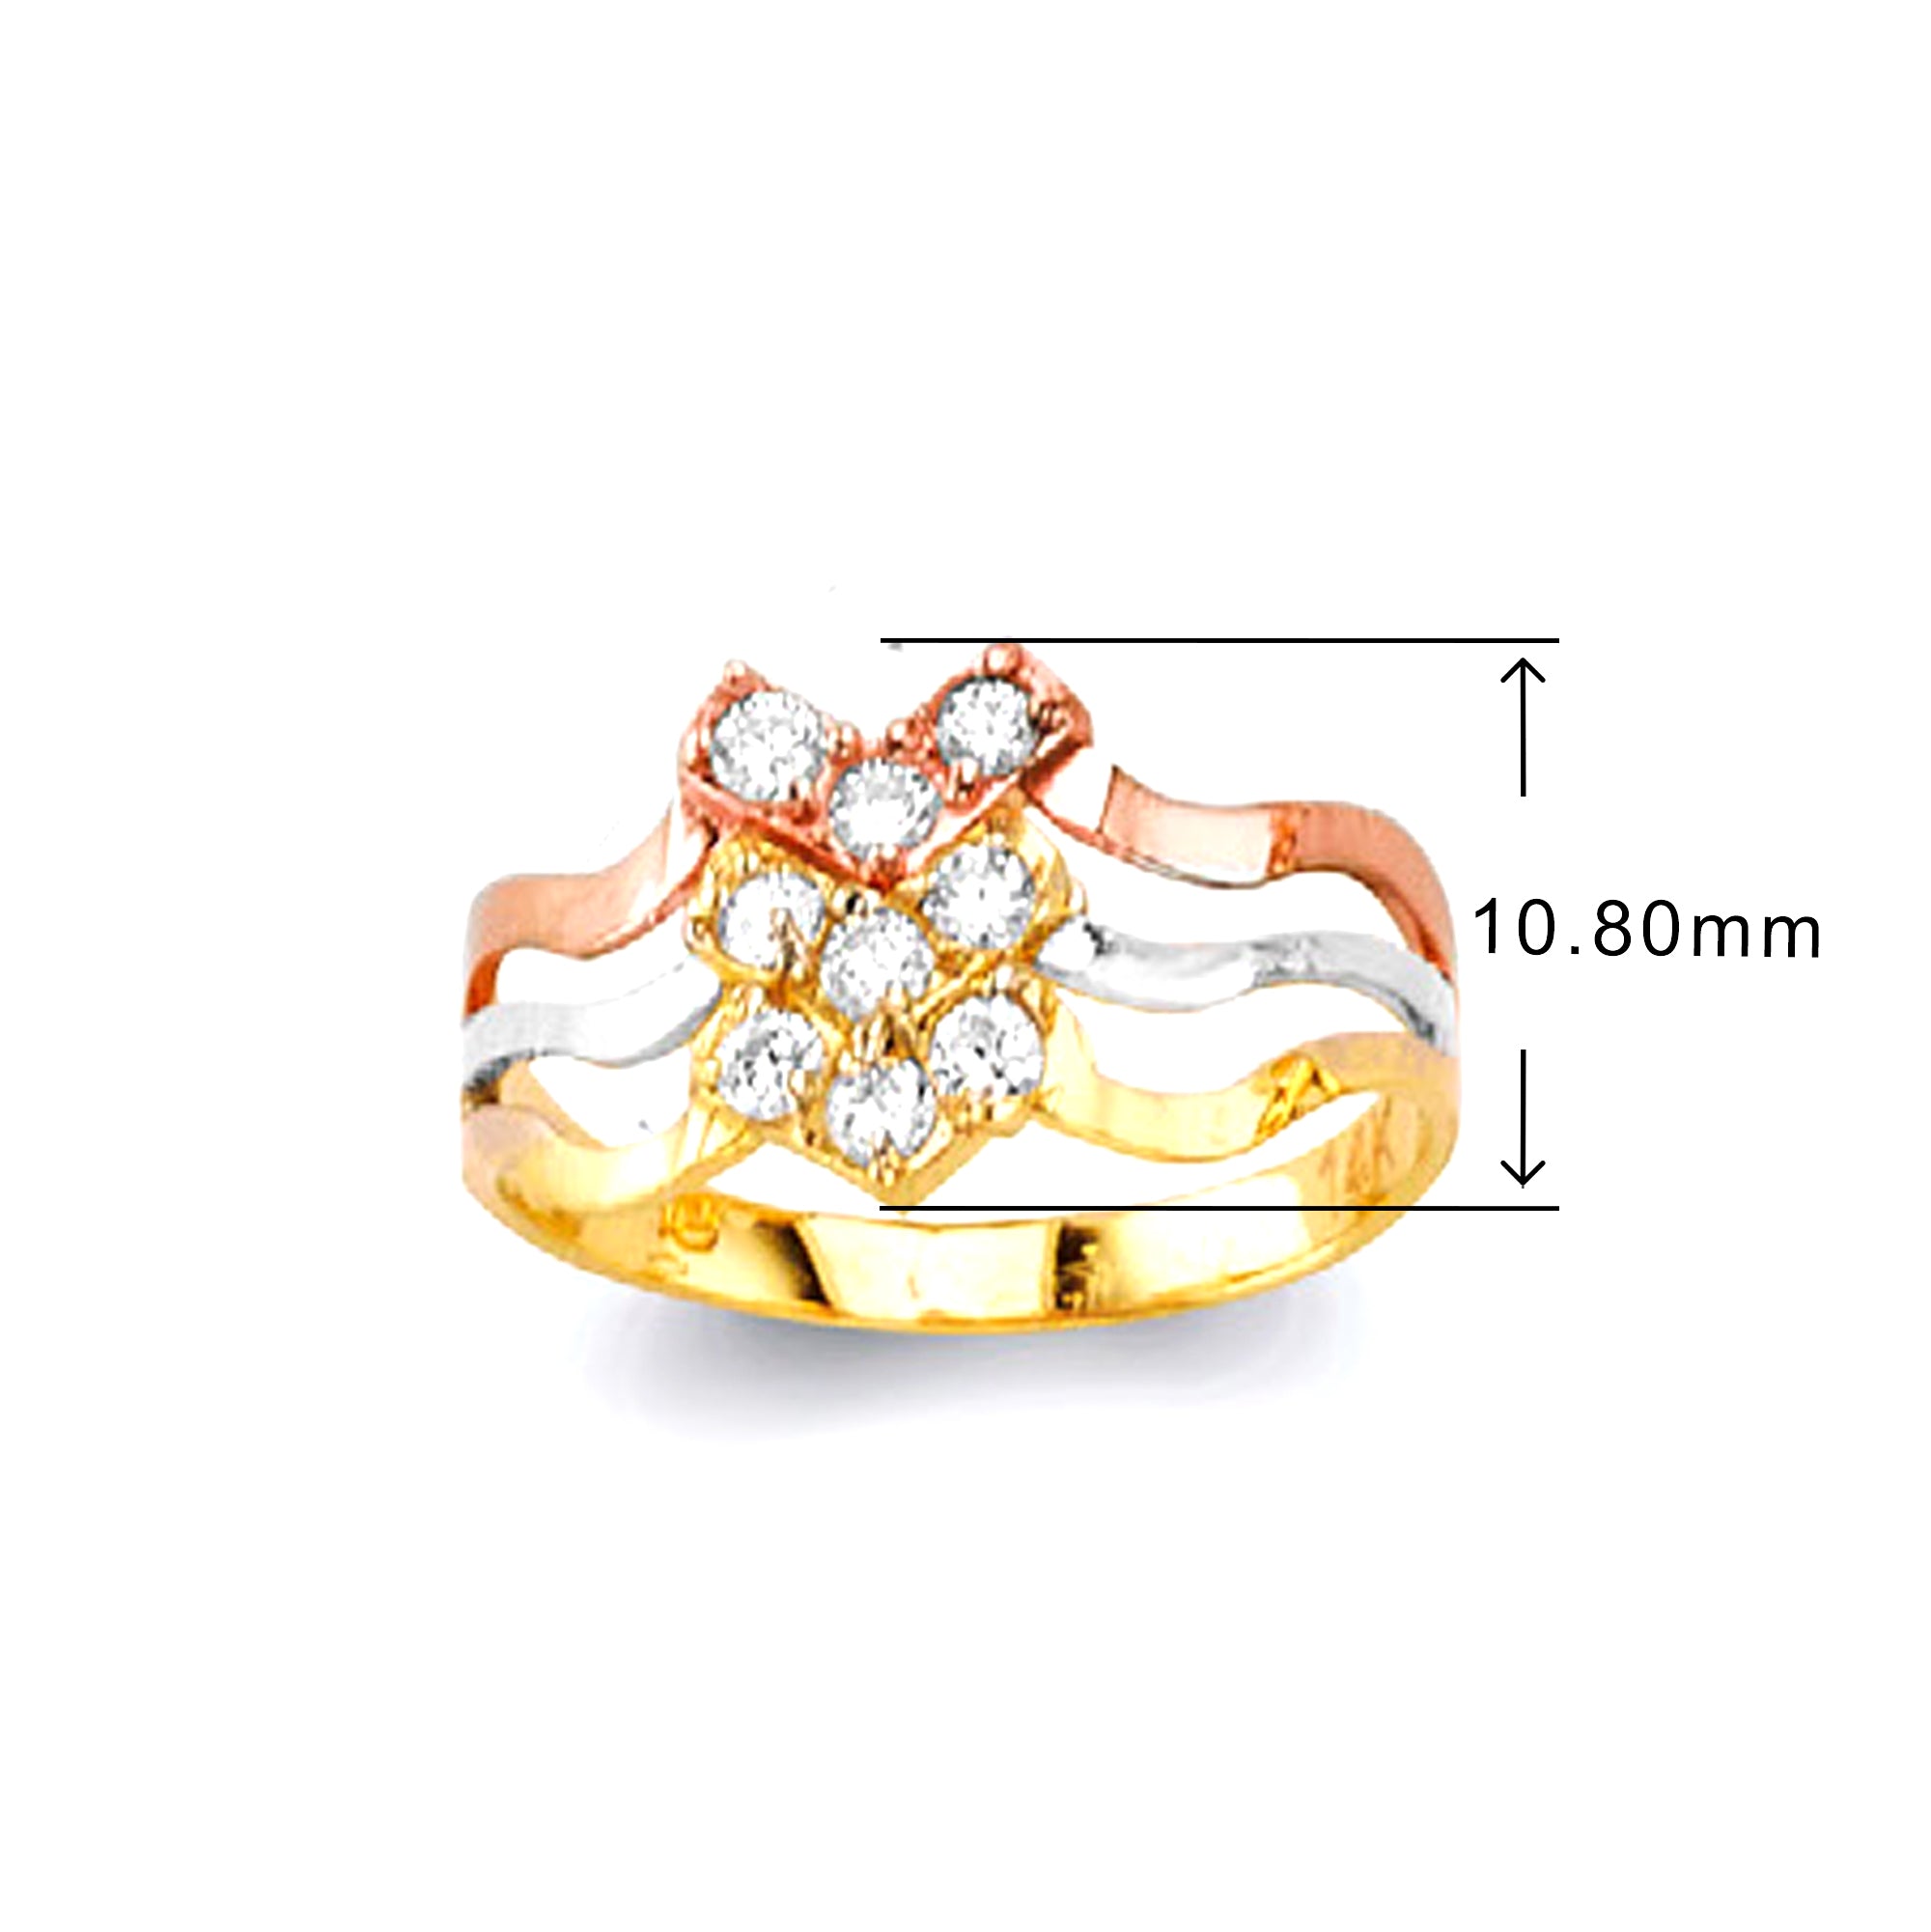 CZ Surreal Crown Shaped Ring in Solid Gold with Measurement